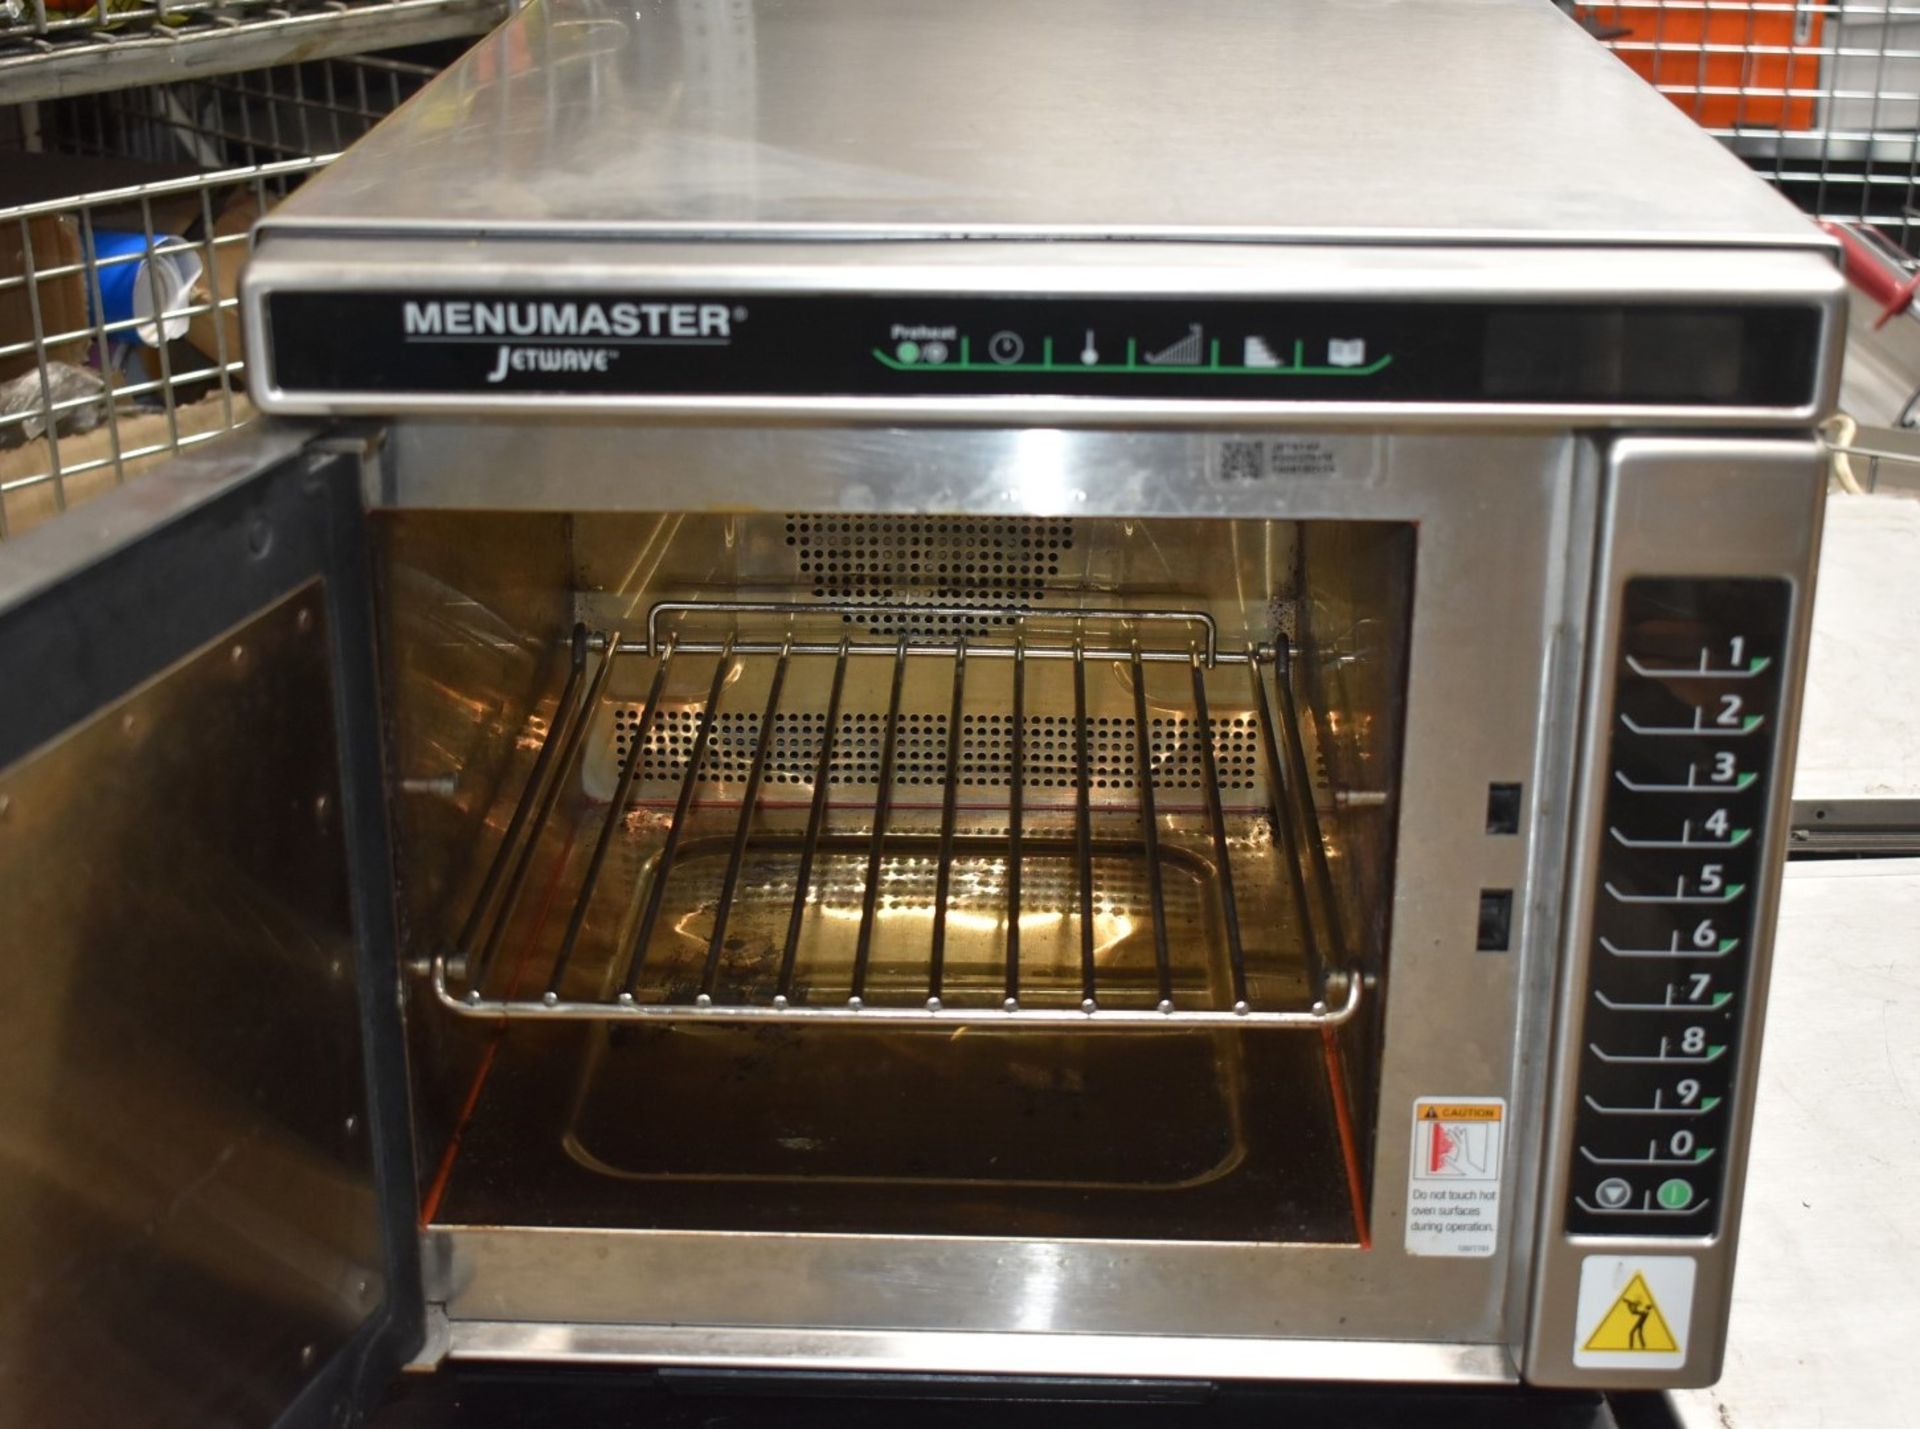 1 x Menumaster Jetwave JET514U High Speed Combination Microwave Oven - RRP £2,400 - Manufacture - Image 4 of 9